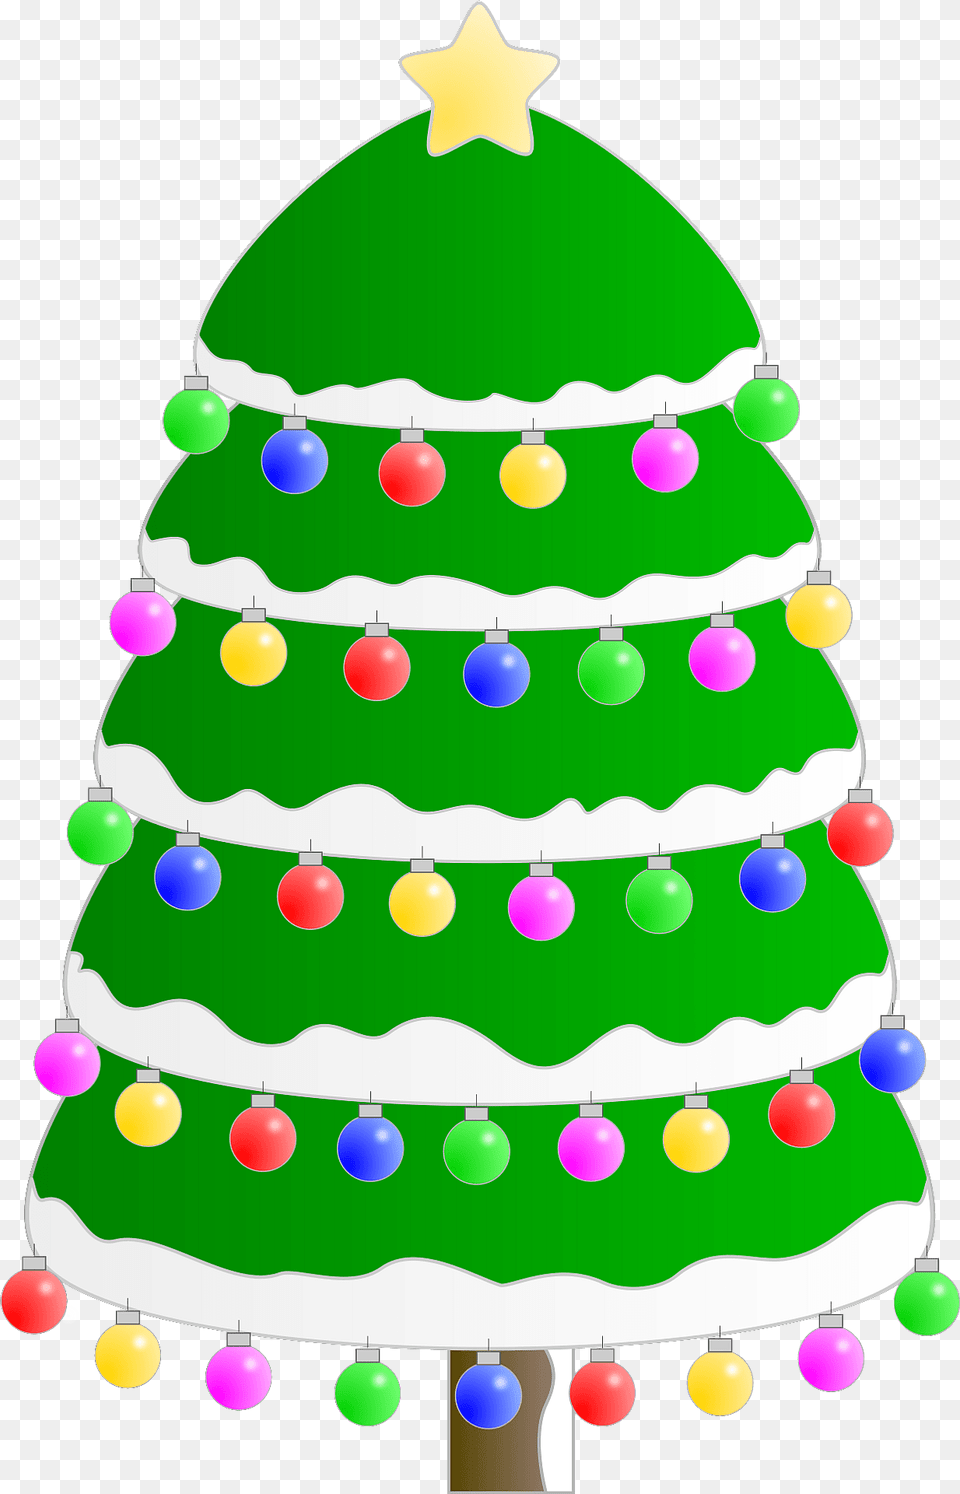 Christmas Tree With Ornaments And A Star Clipart Free Png